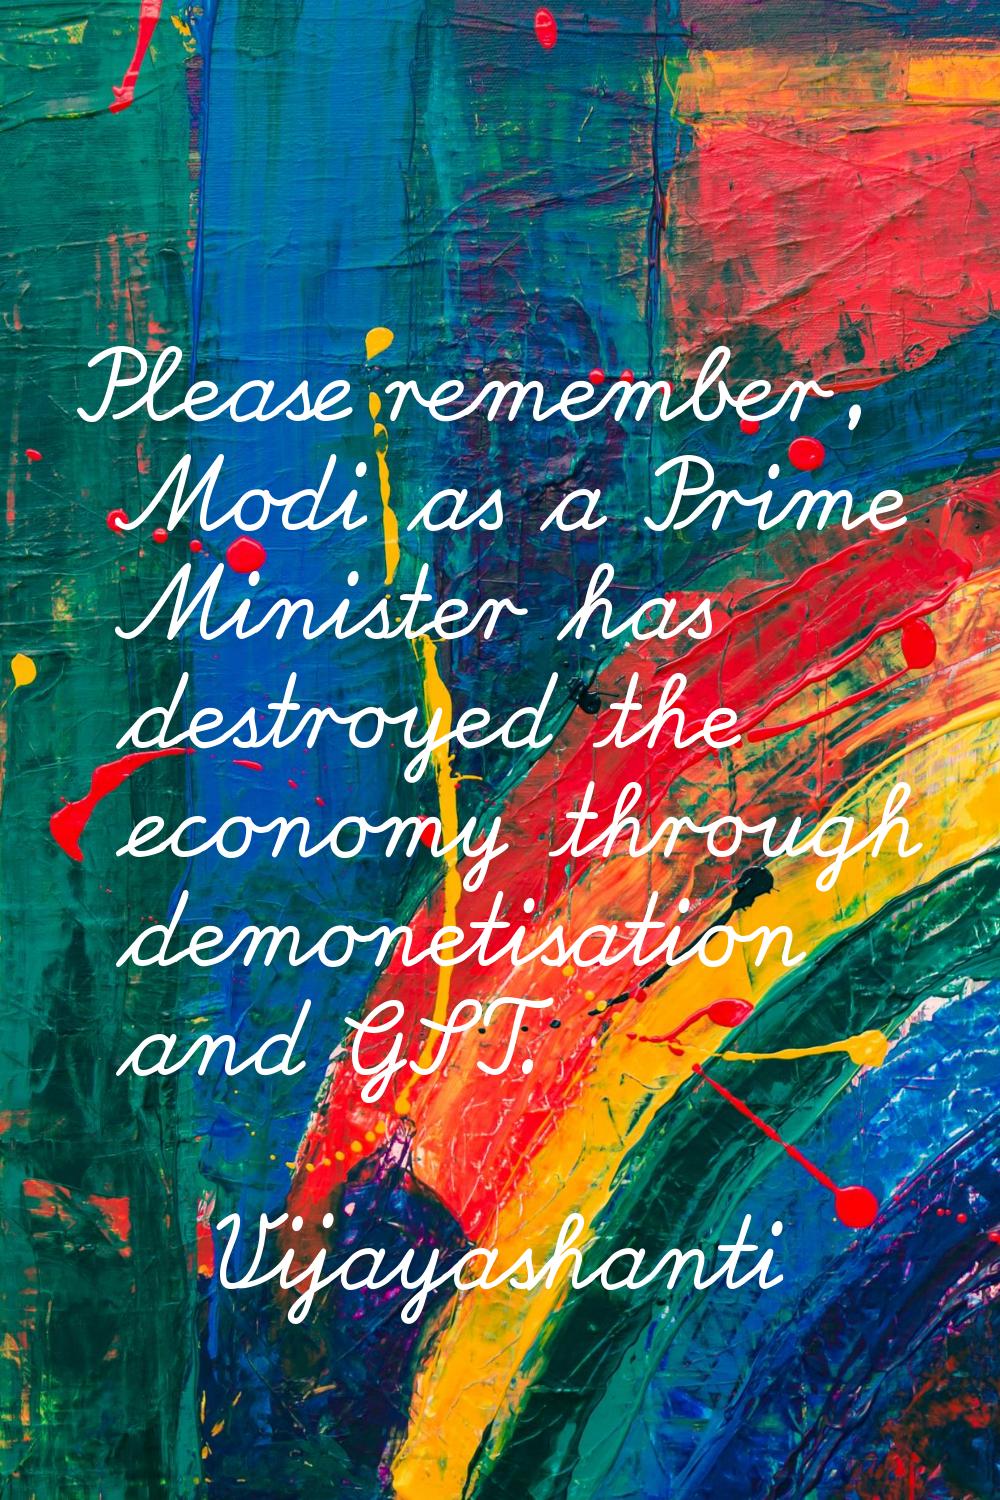 Please remember, Modi as a Prime Minister has destroyed the economy through demonetisation and GST.